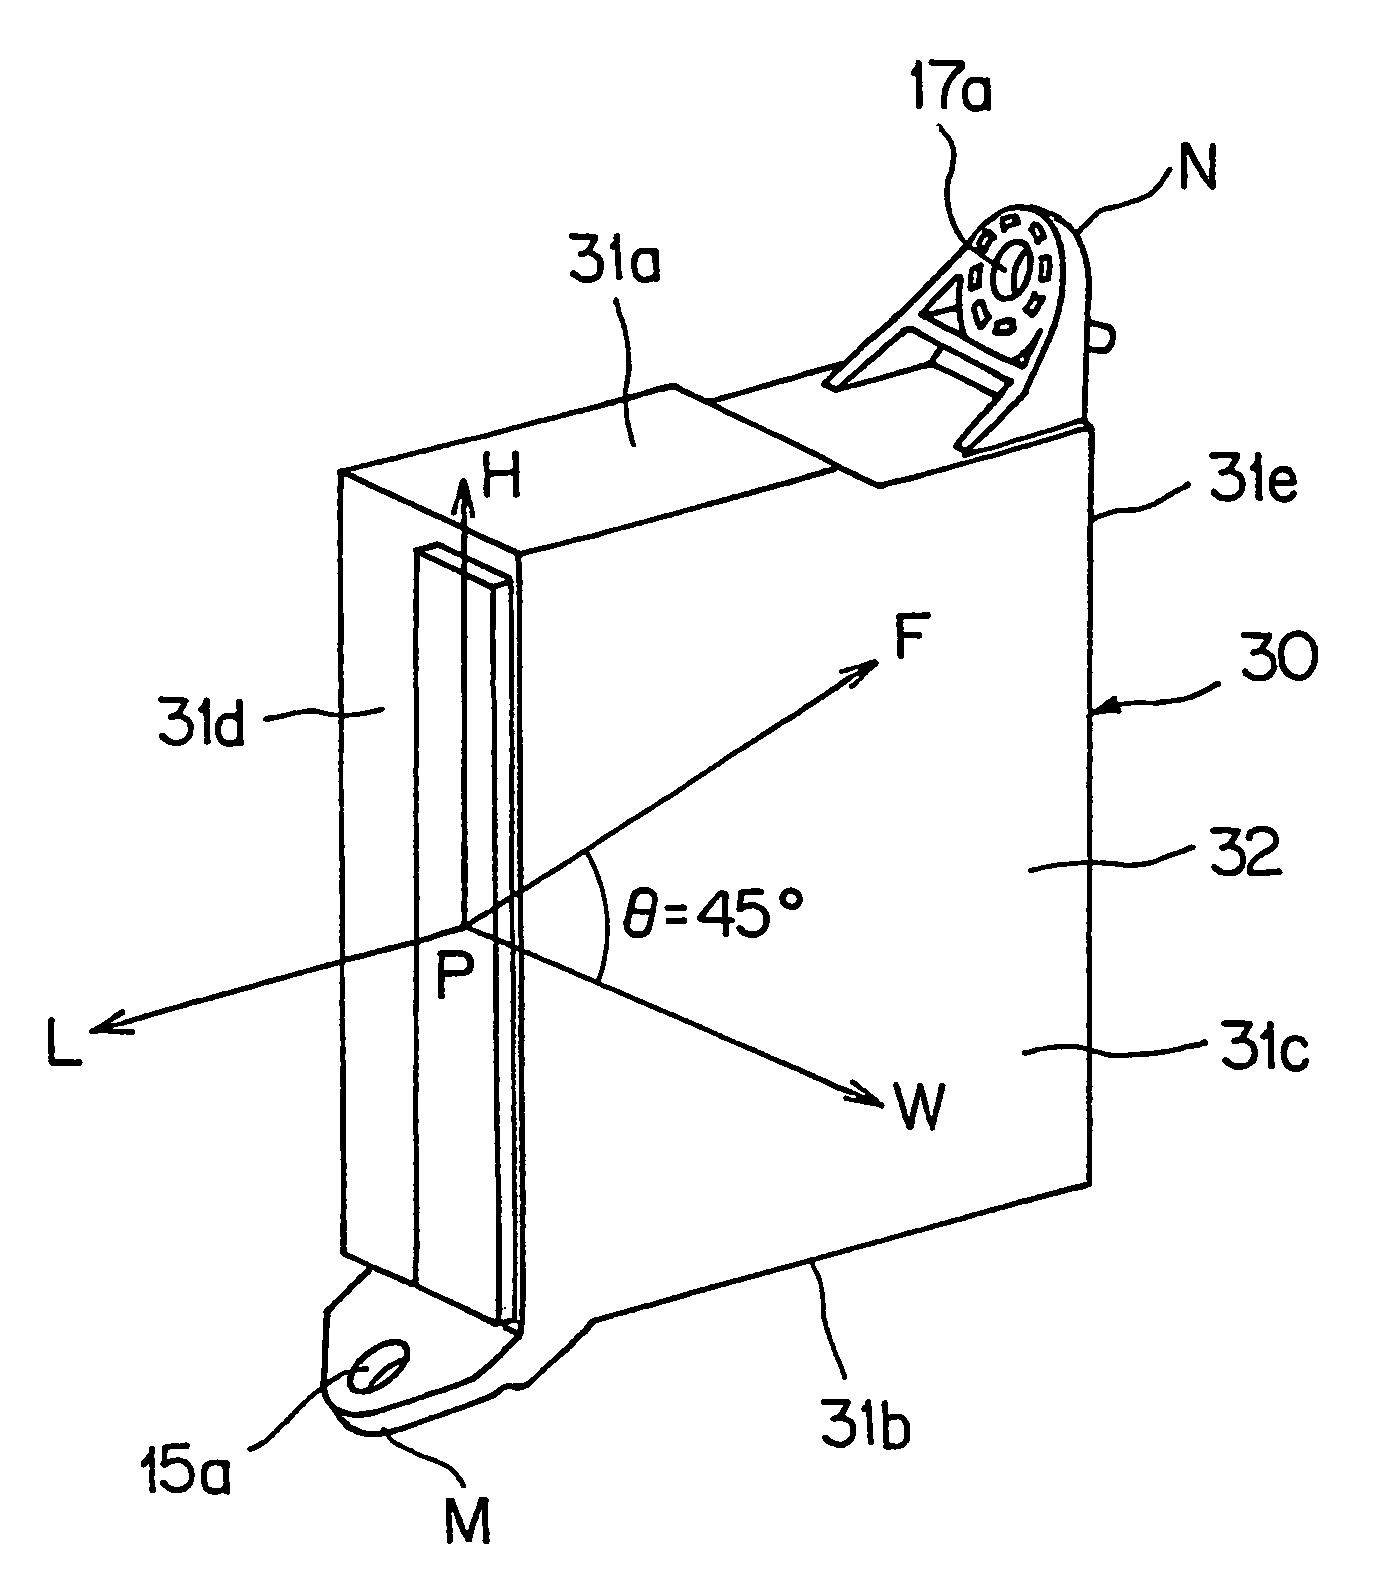 Attachment structure for electric junction box